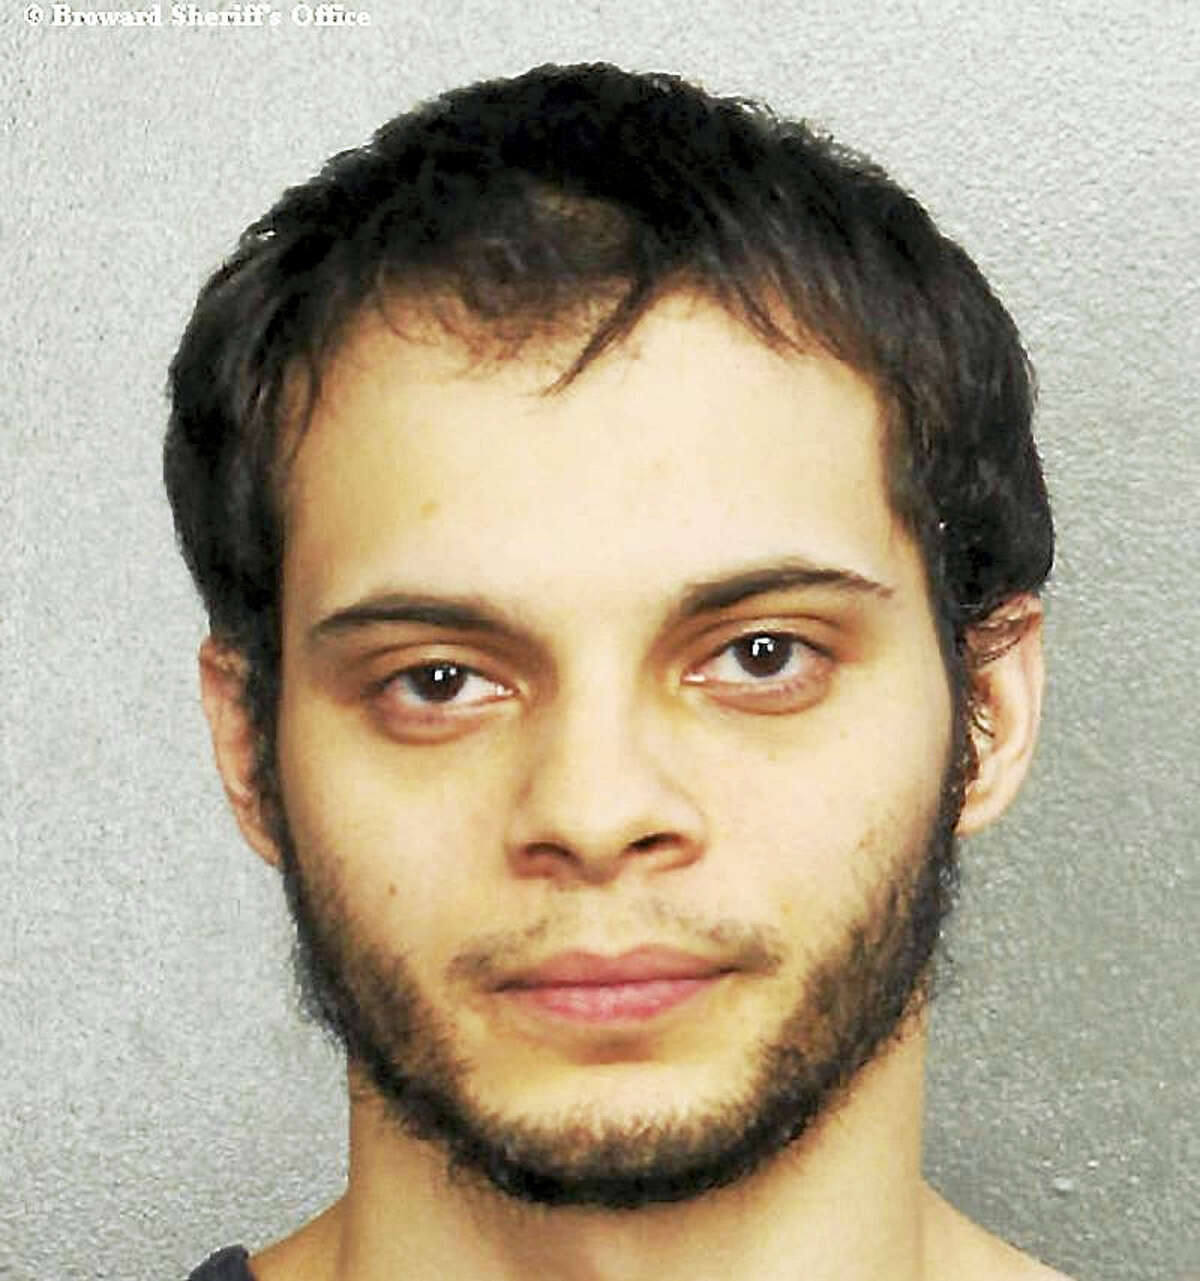 This booking photo provided by the Broward Sheriff’s Office shows suspect Esteban Ruiz Santiago, 26, Saturday, Jan. 7, 2017, in Fort Lauderdale, Fla. Relatives of the man who police say opened fire Friday killing several people and wounding others at a Florida airport report he had a history of mental health issues. They tell The Associated Press and other news outlets that some of the problems followed his time serving a military tour in Iraq, and that he was being treated at his current home in Alaska.